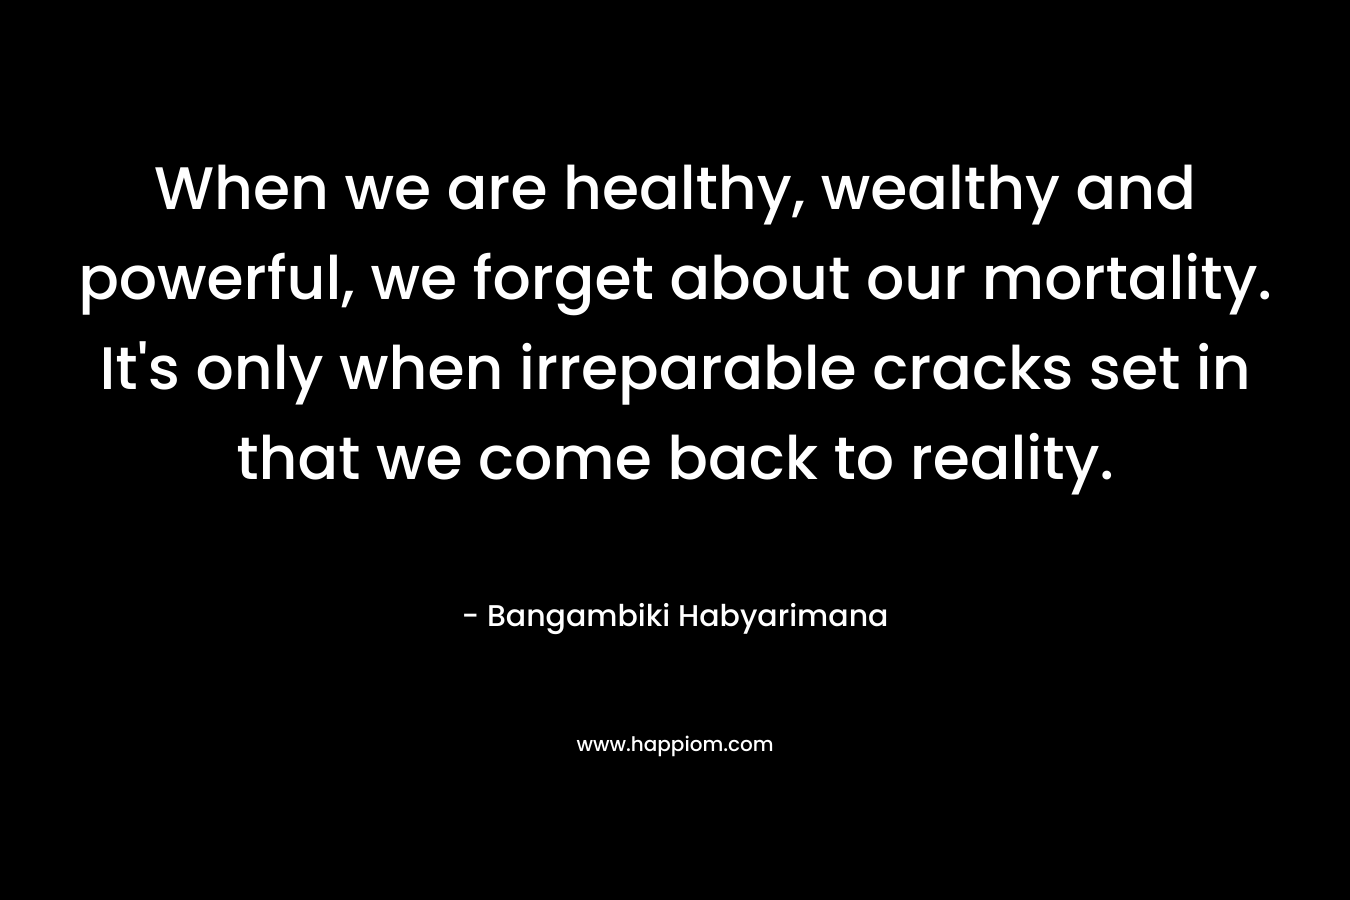 When we are healthy, wealthy and powerful, we forget about our mortality. It's only when irreparable cracks set in that we come back to reality.